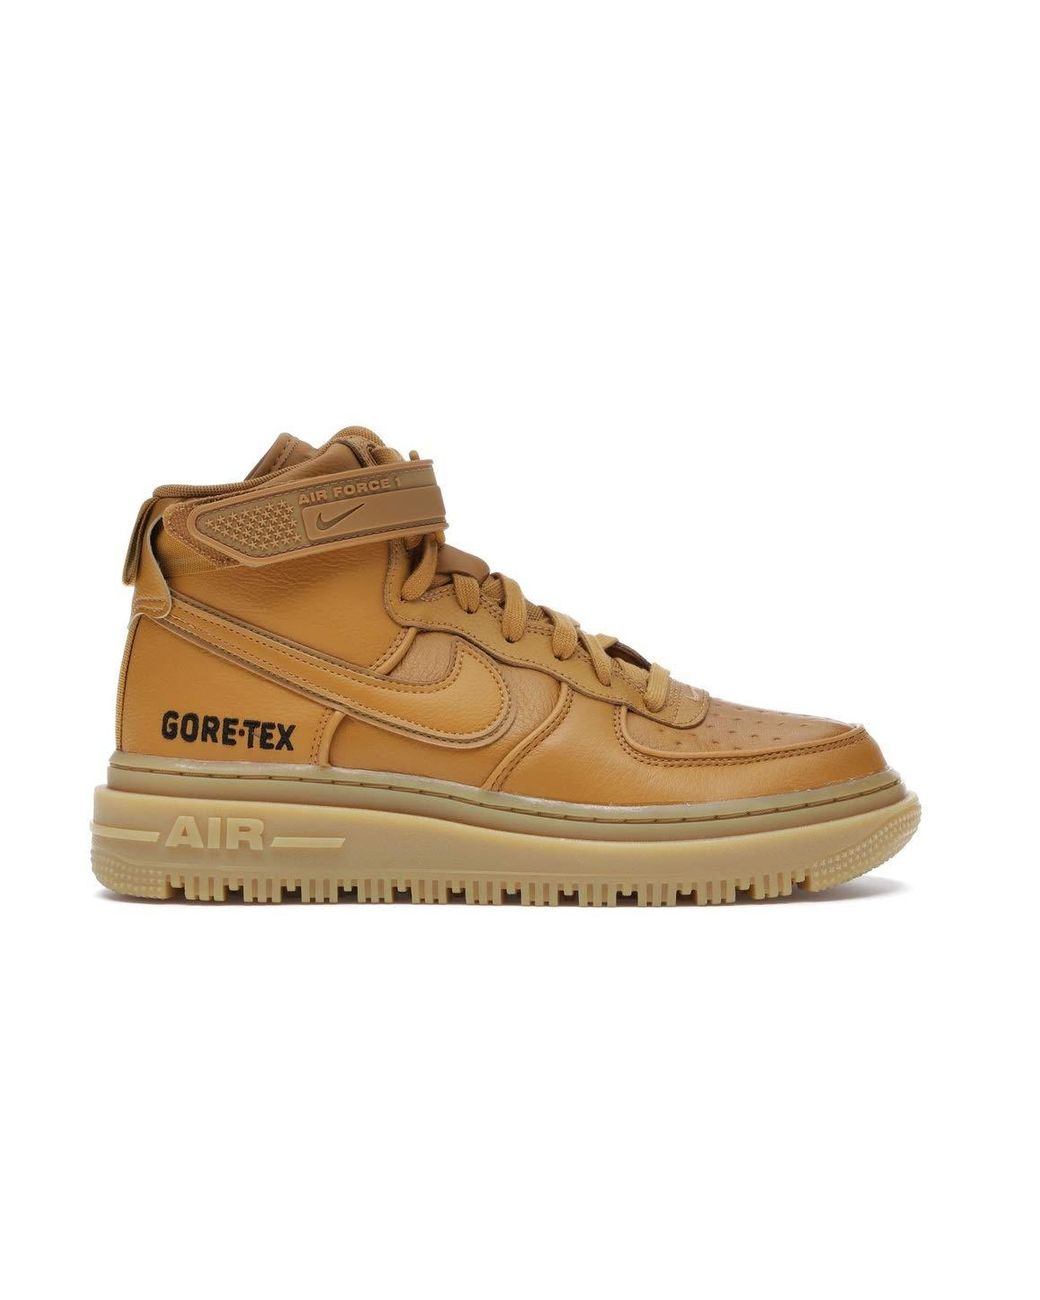 Nike Air Force 1 Af1 High Gore-tex Boot Flax Brown Ct2815-200 Us Size ...